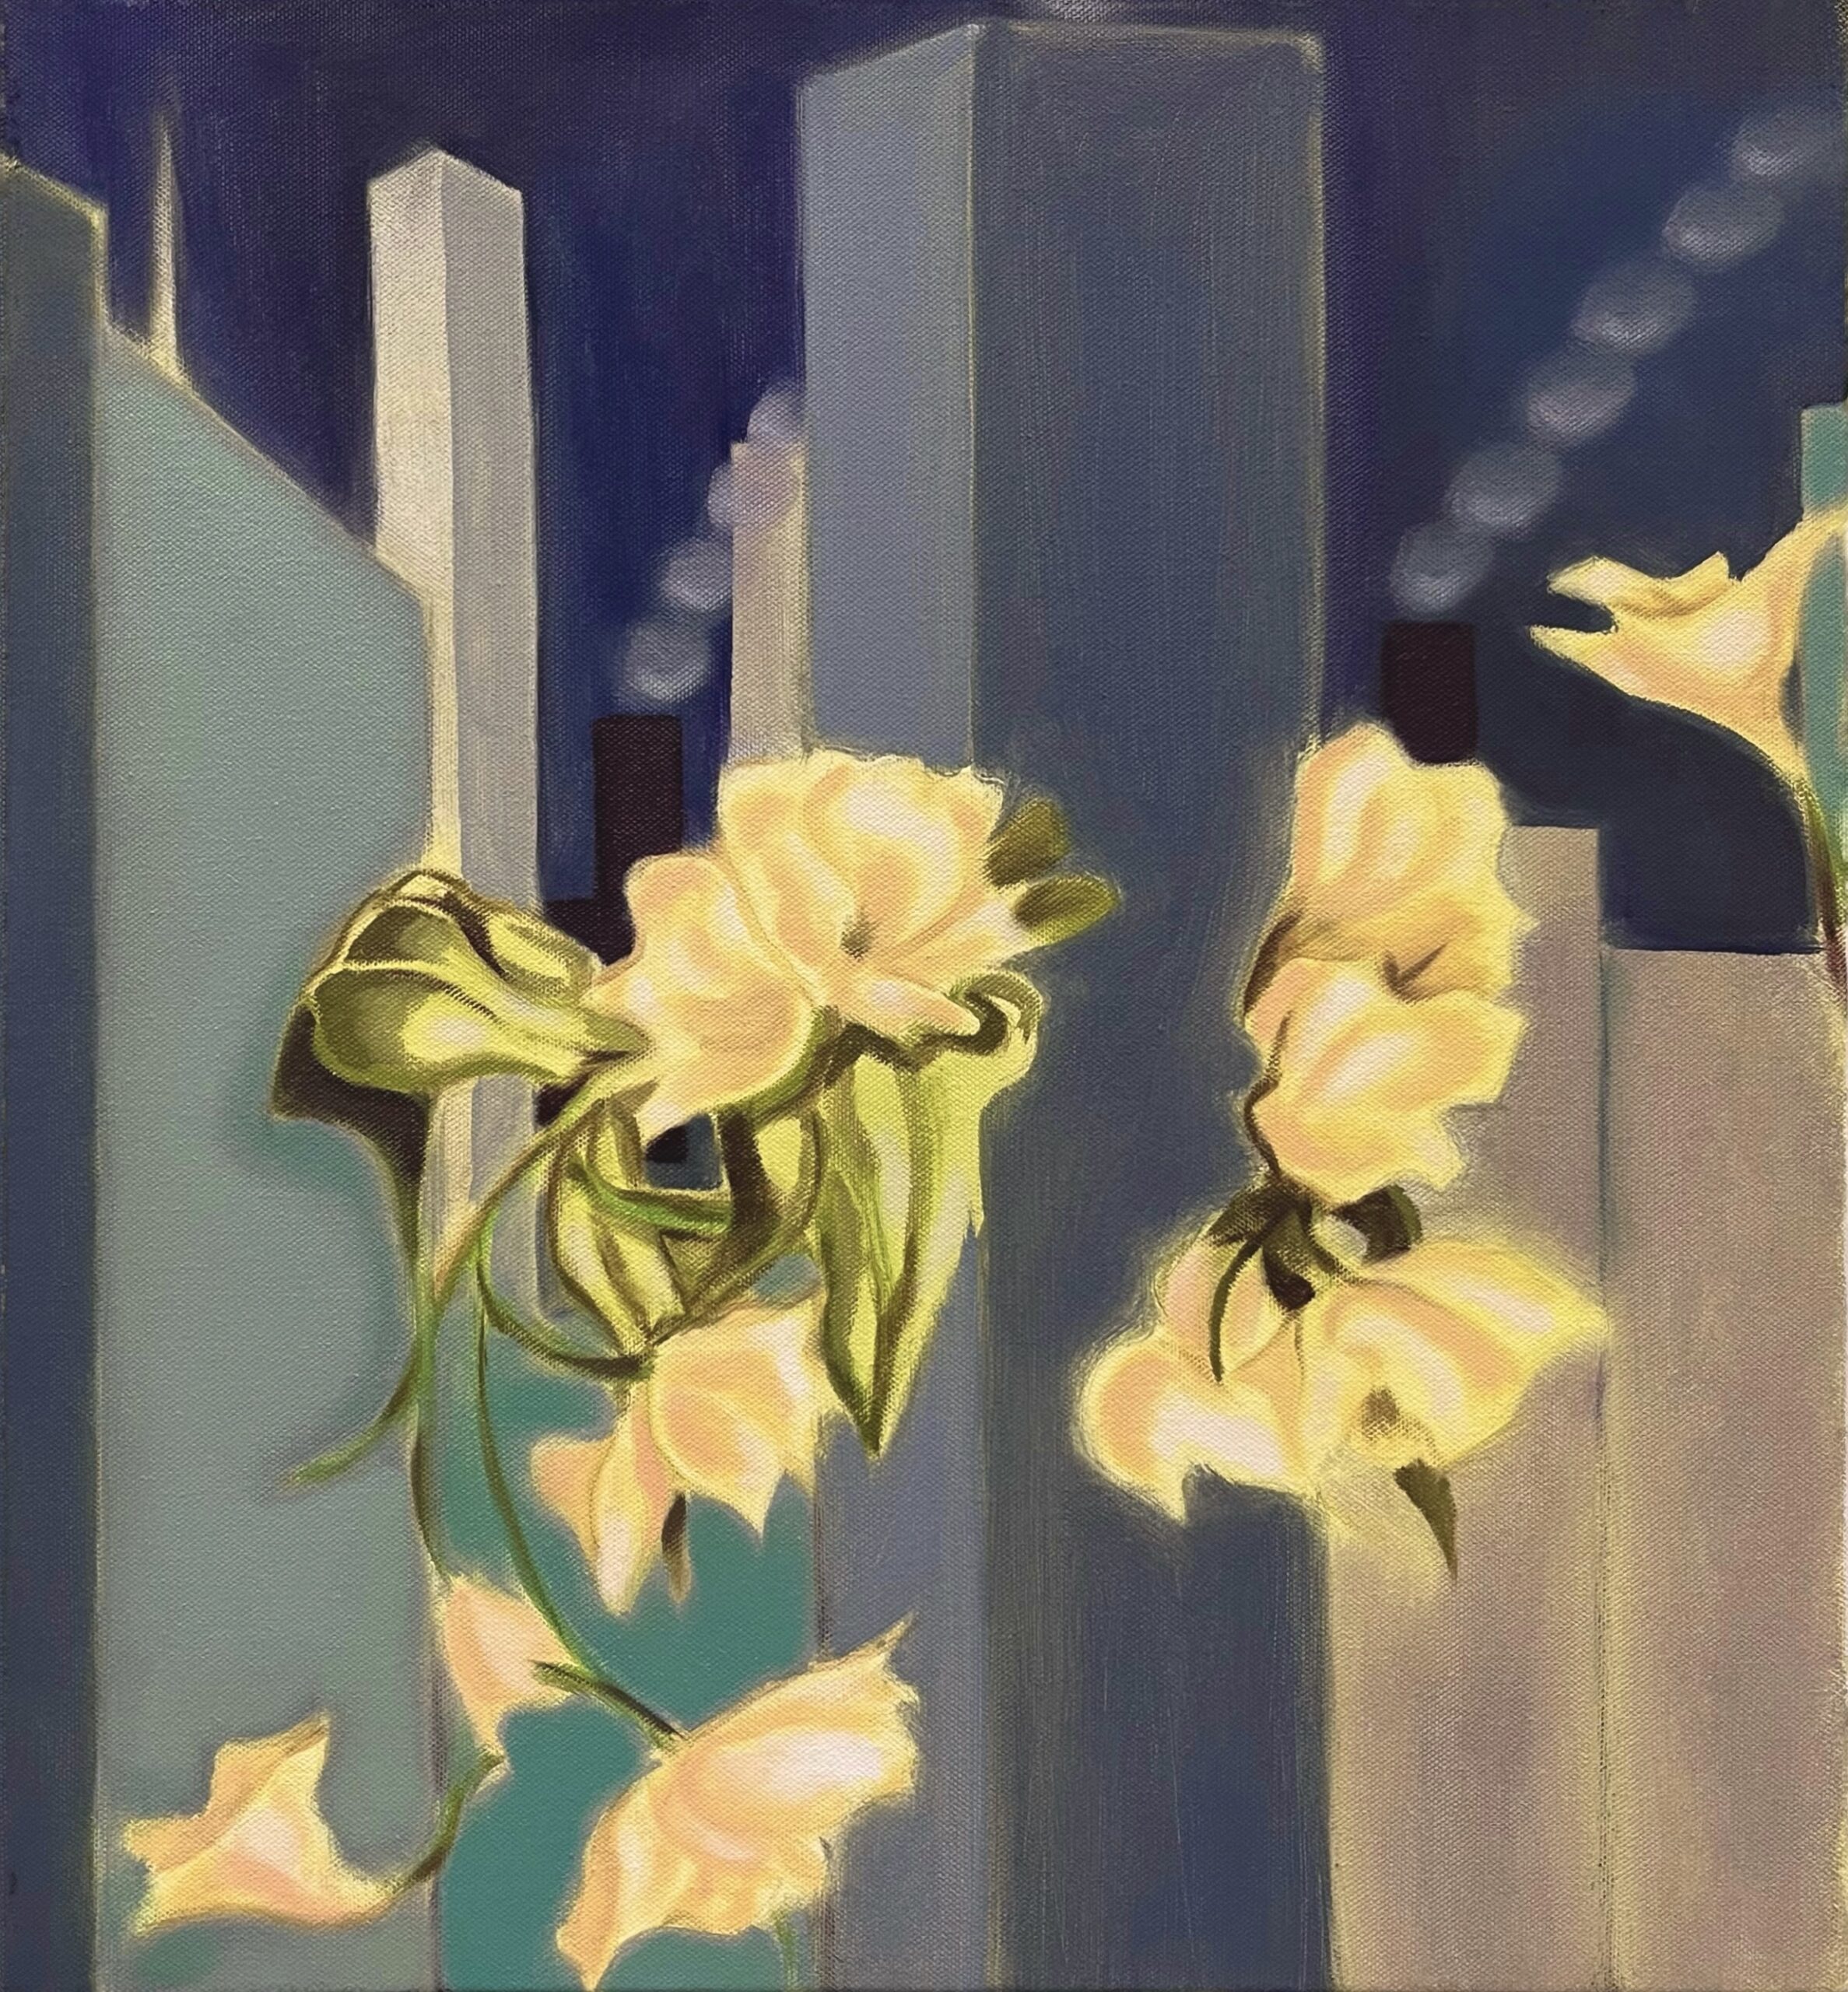 Beautiful golden flowers bloom from columns against a background of blocks and architecture.